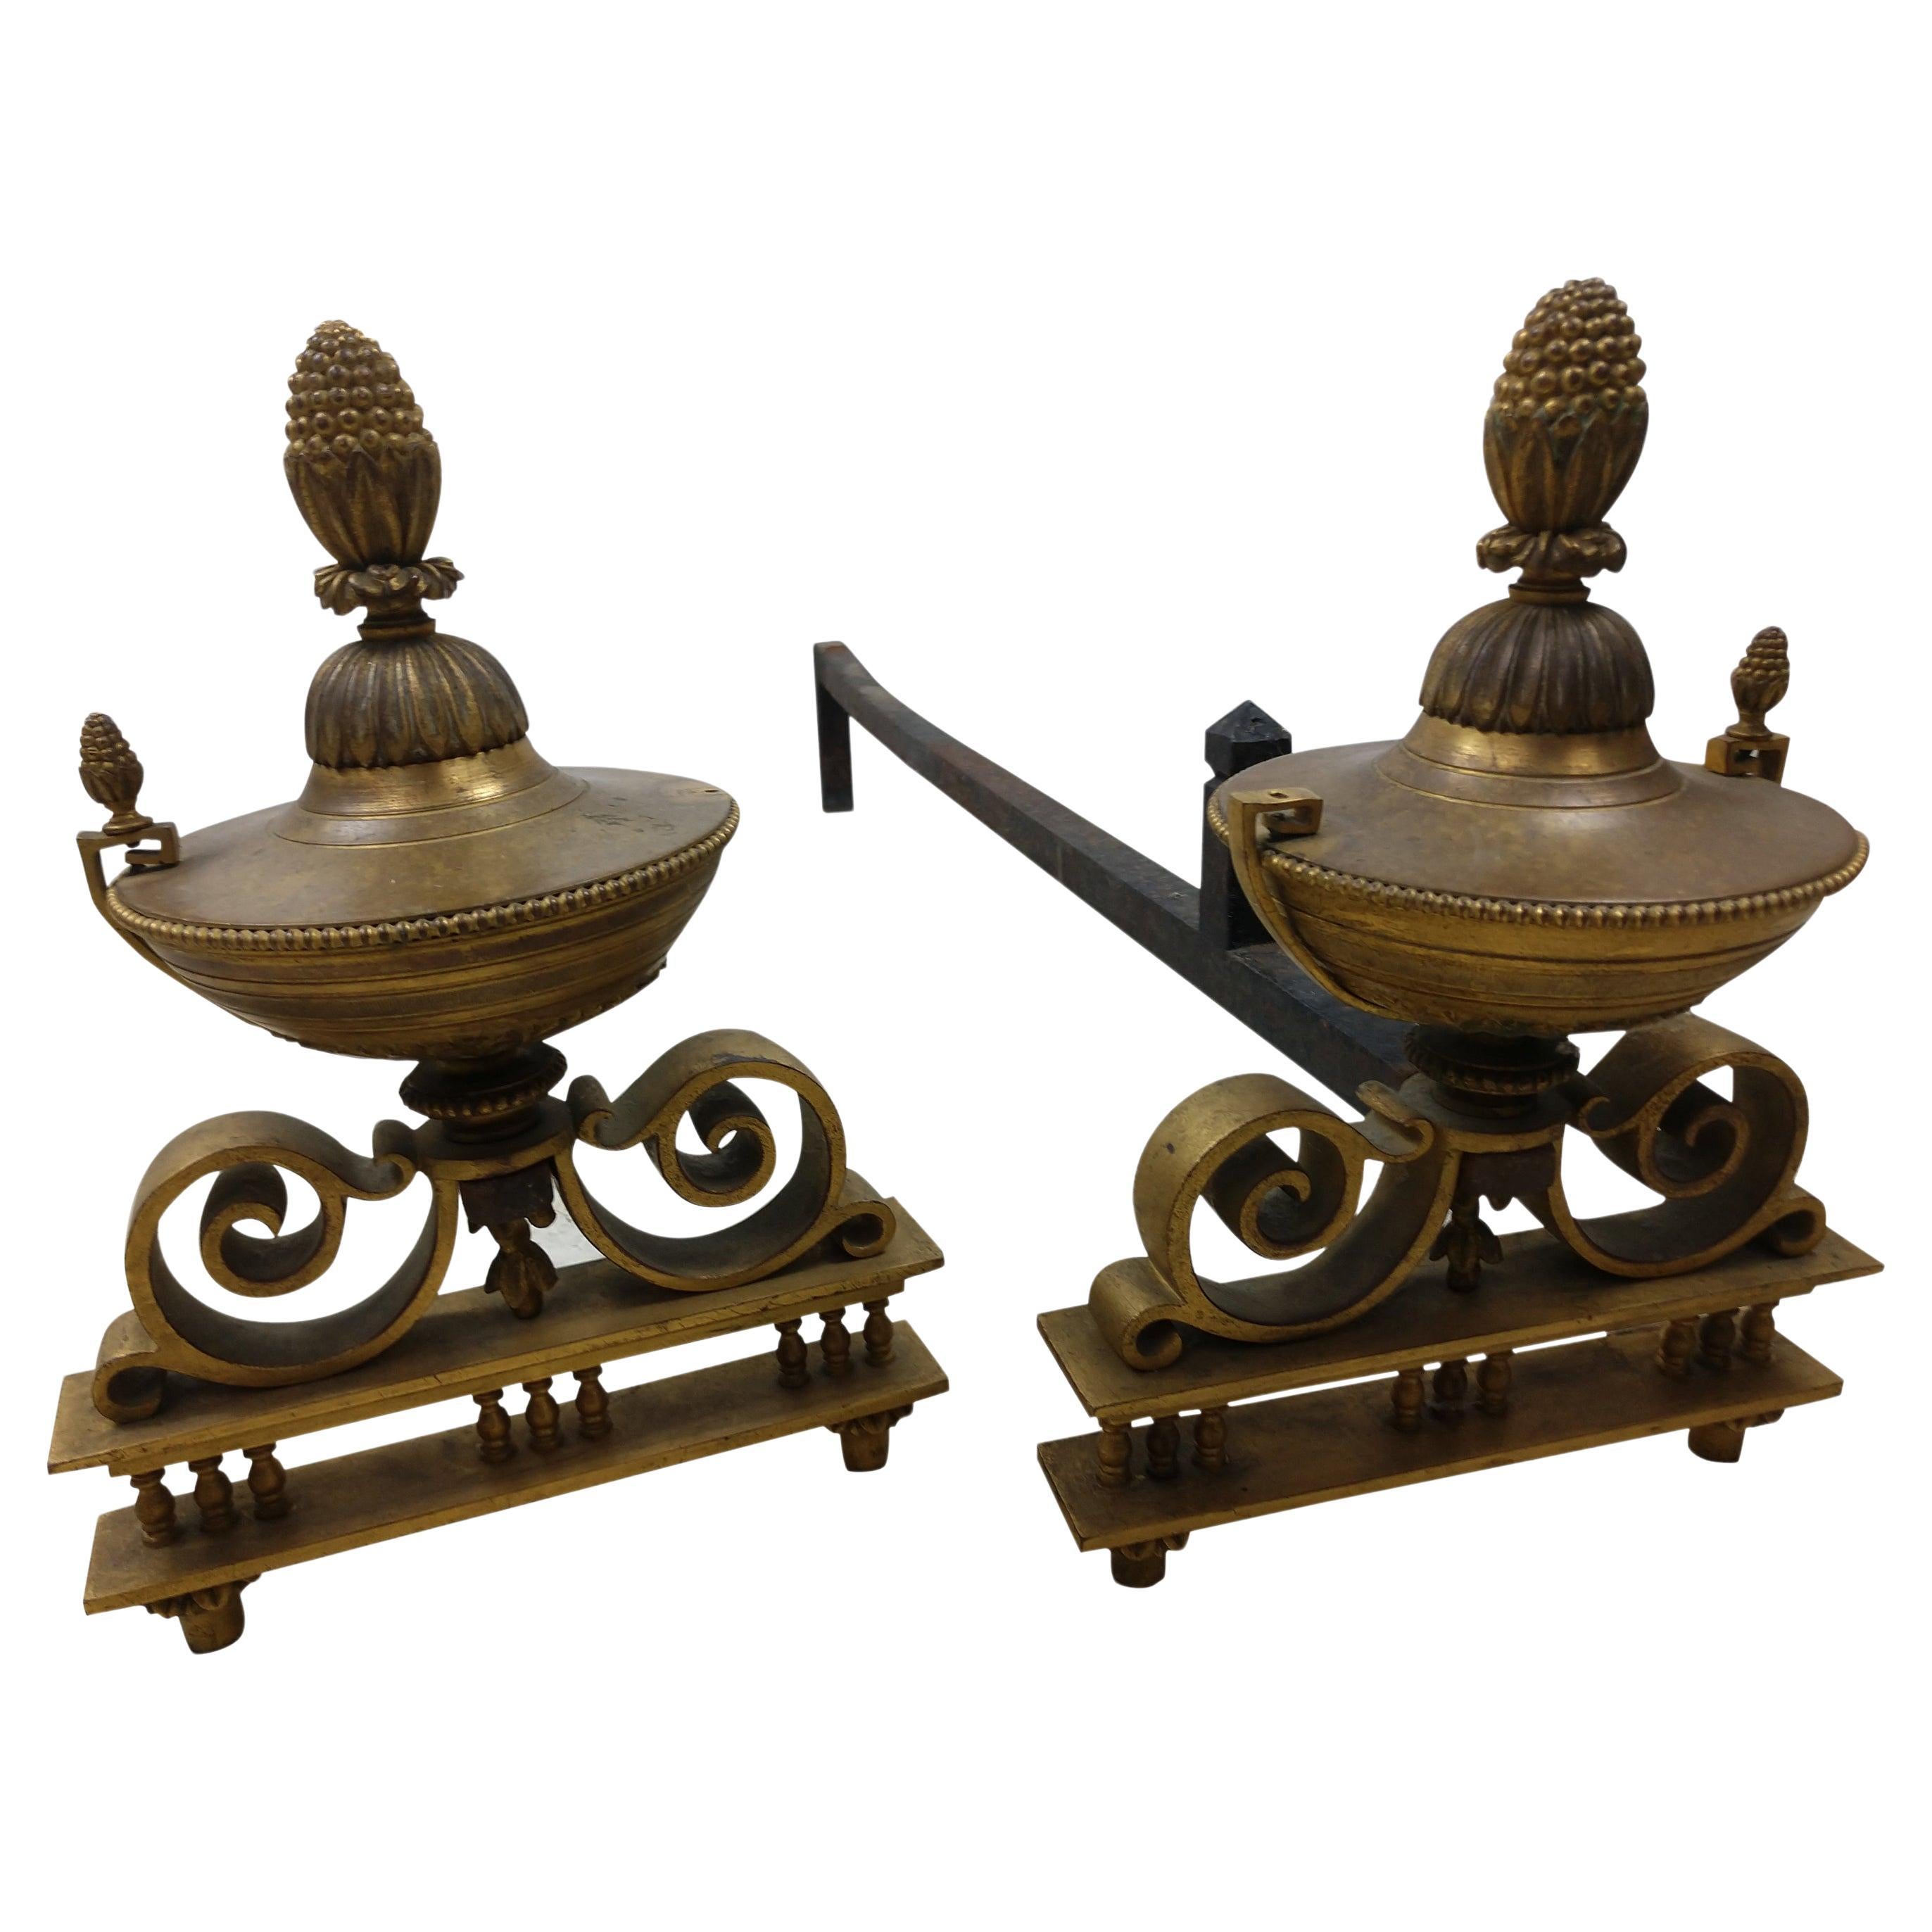 Pair of Antique Bronze Urn Form Fireplace Andirons